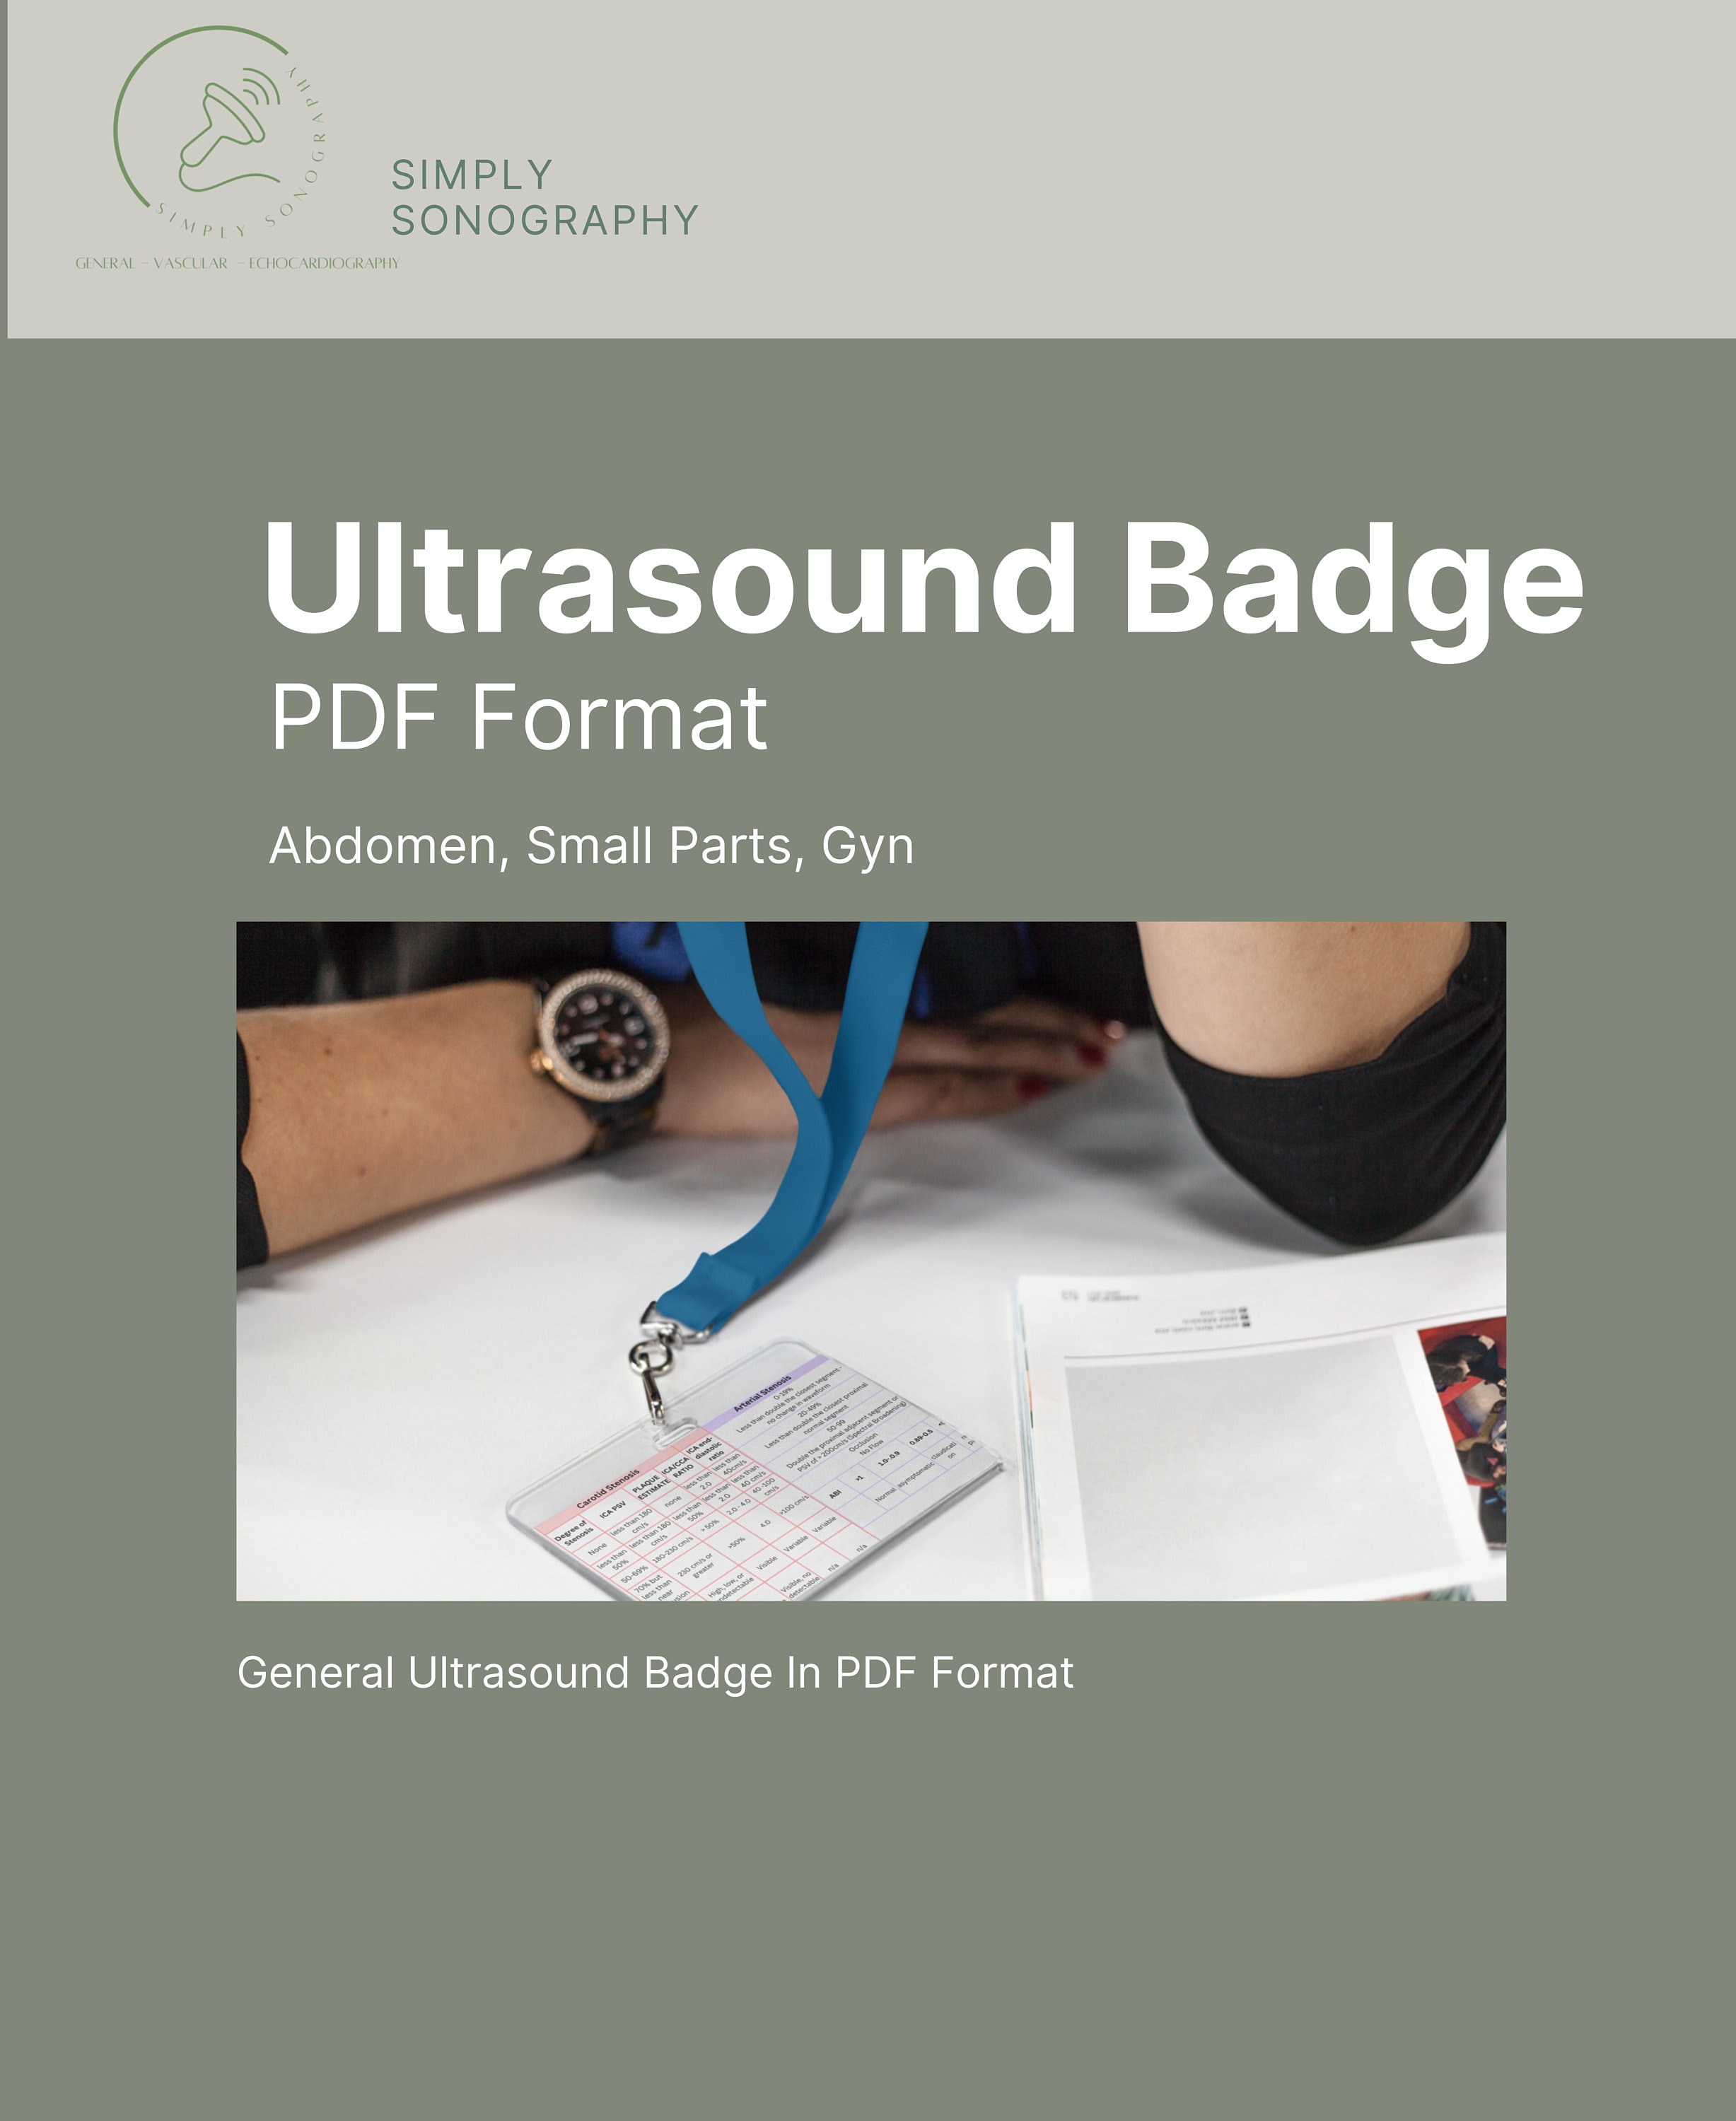 Ultrasound Log Book, Sonography101, Ultrasound Student, Sonography